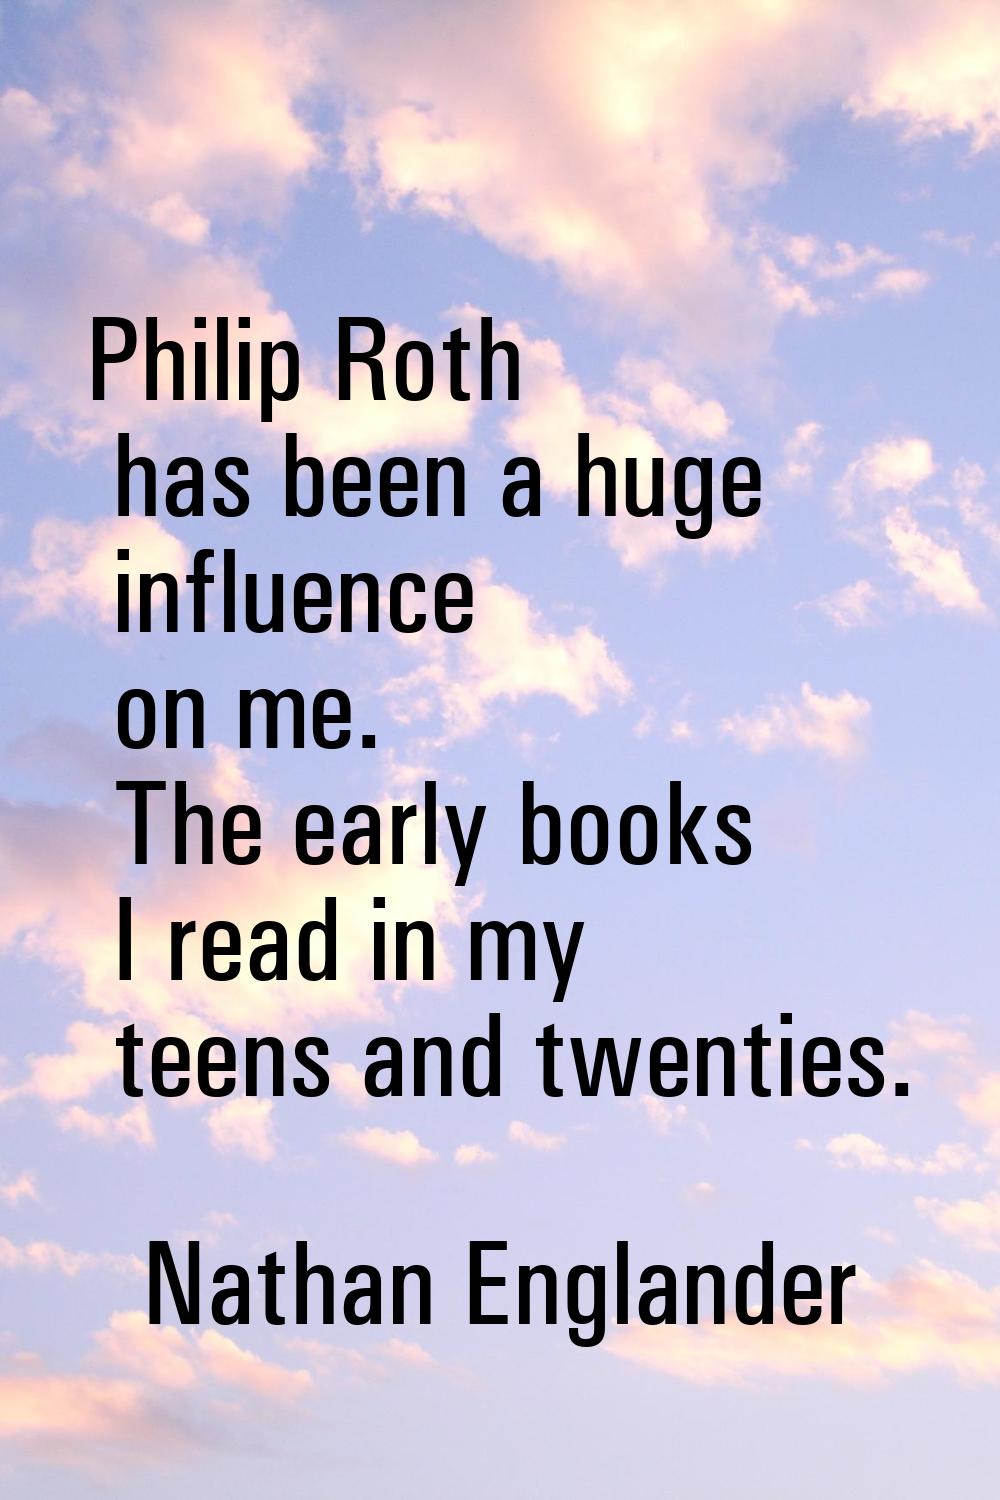 Philip Roth has been a huge influence on me. The early books I read in my teens and twenties.